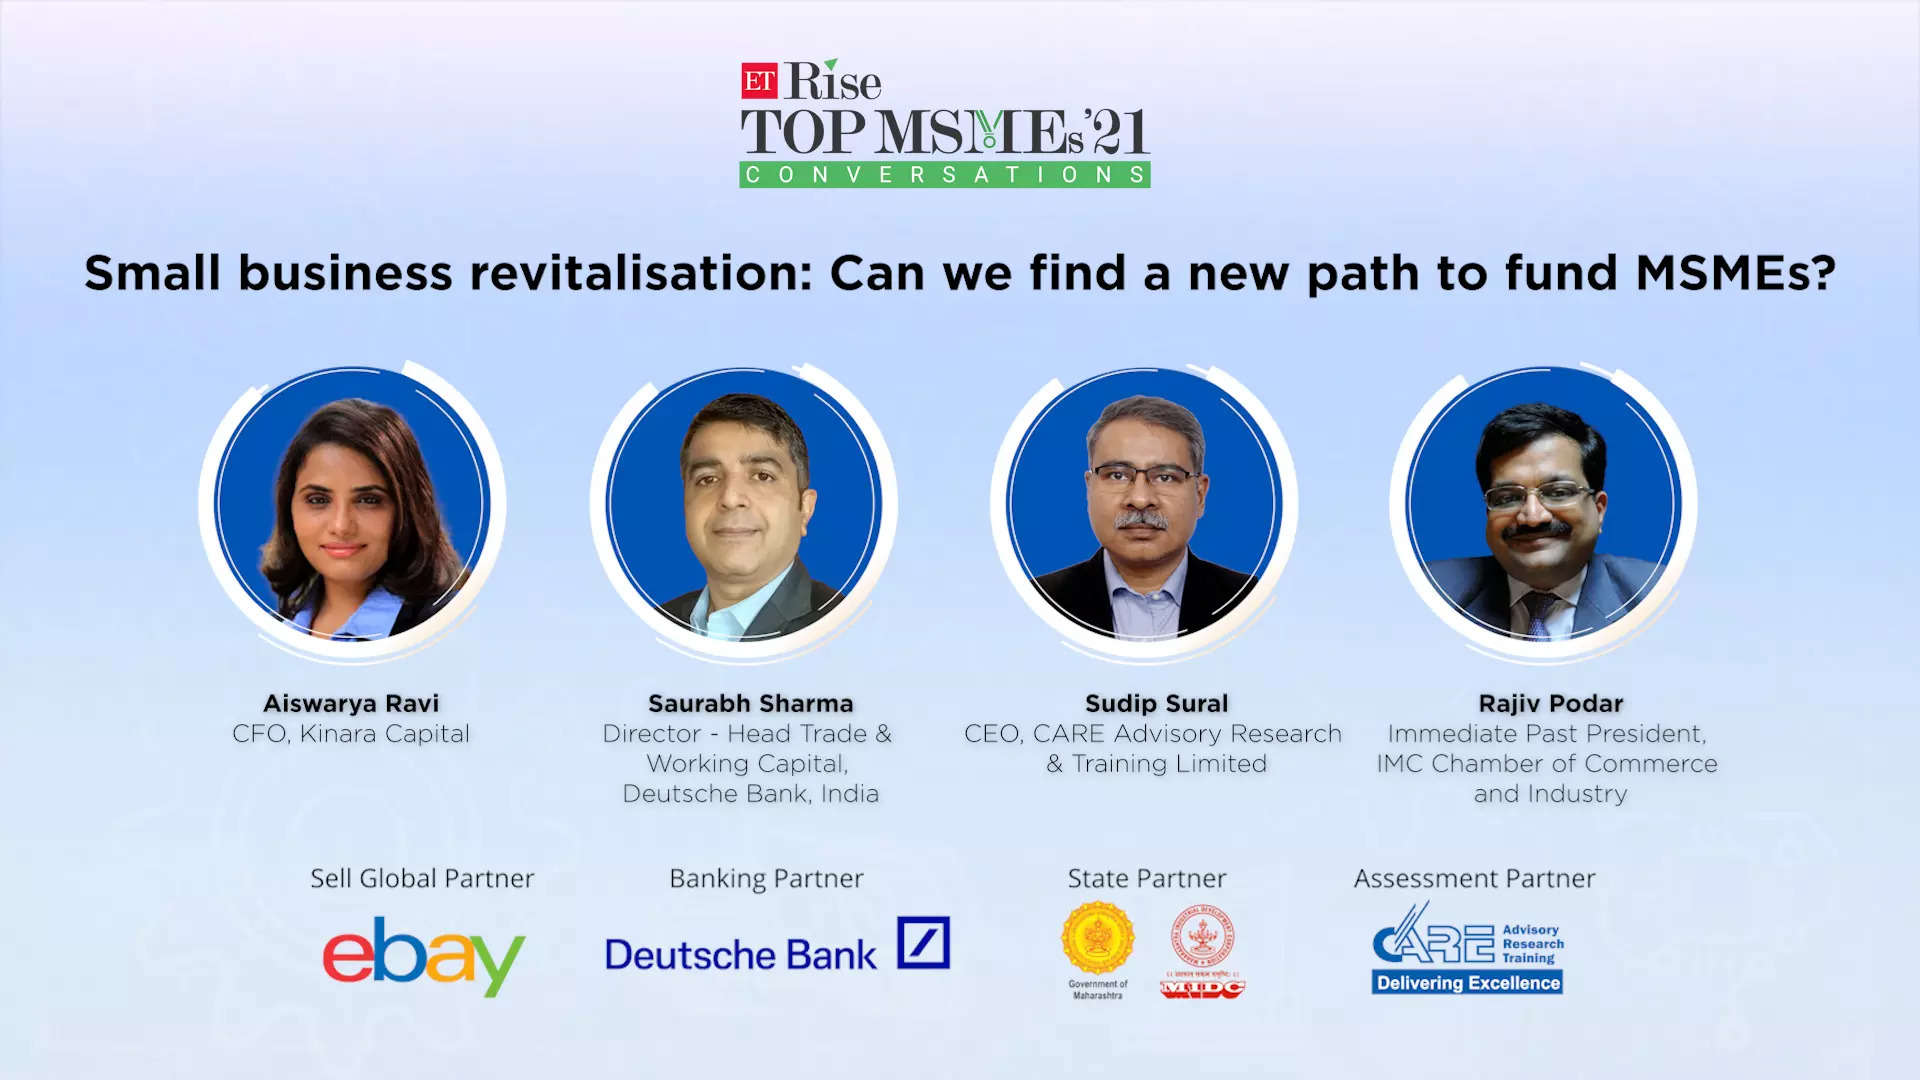 ETRise Top MSMEs '21 Conversations | Small business revitalisation: Can we find a new path to fund MSMEs?